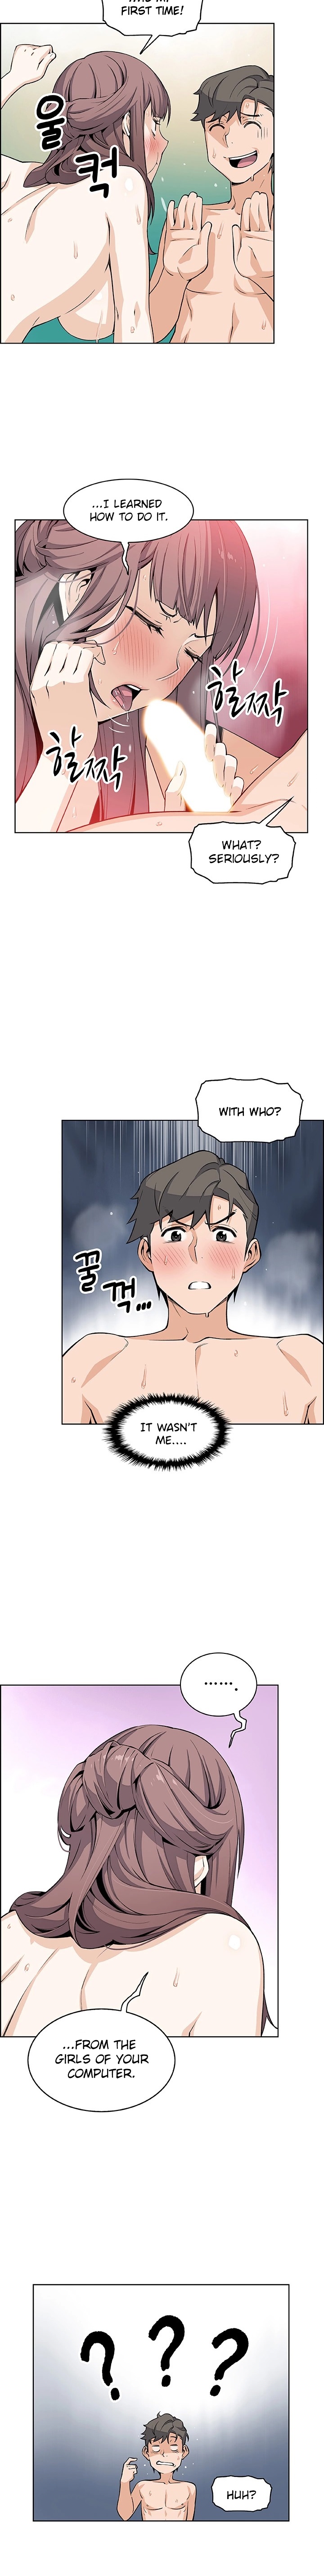 Housekeeper Manhwa - Chapter 26 Page 6